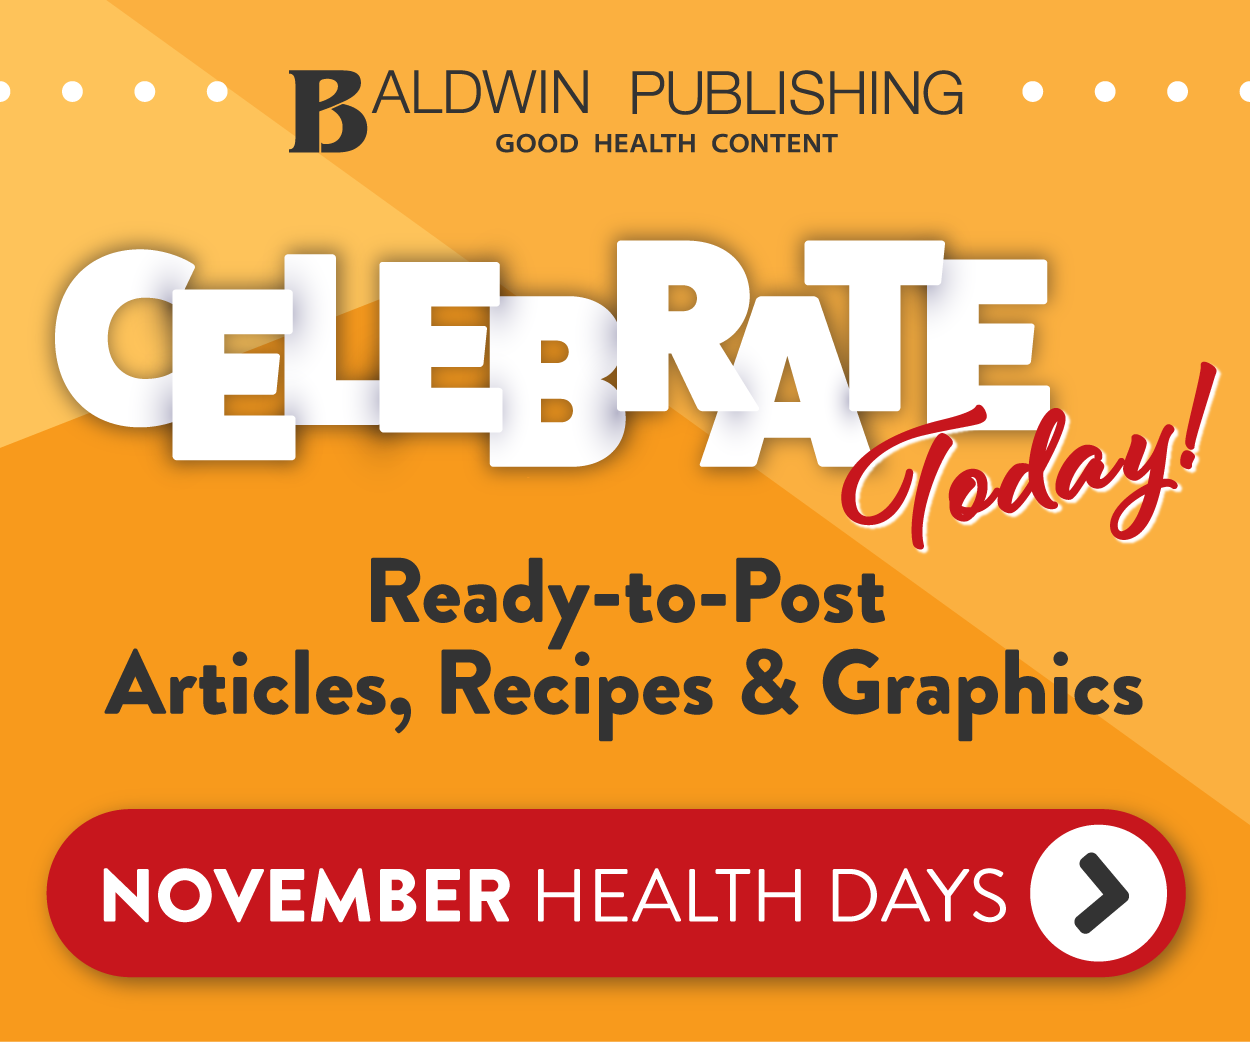 Baldwin Publishing - Celebrate Today, See All November Health Days